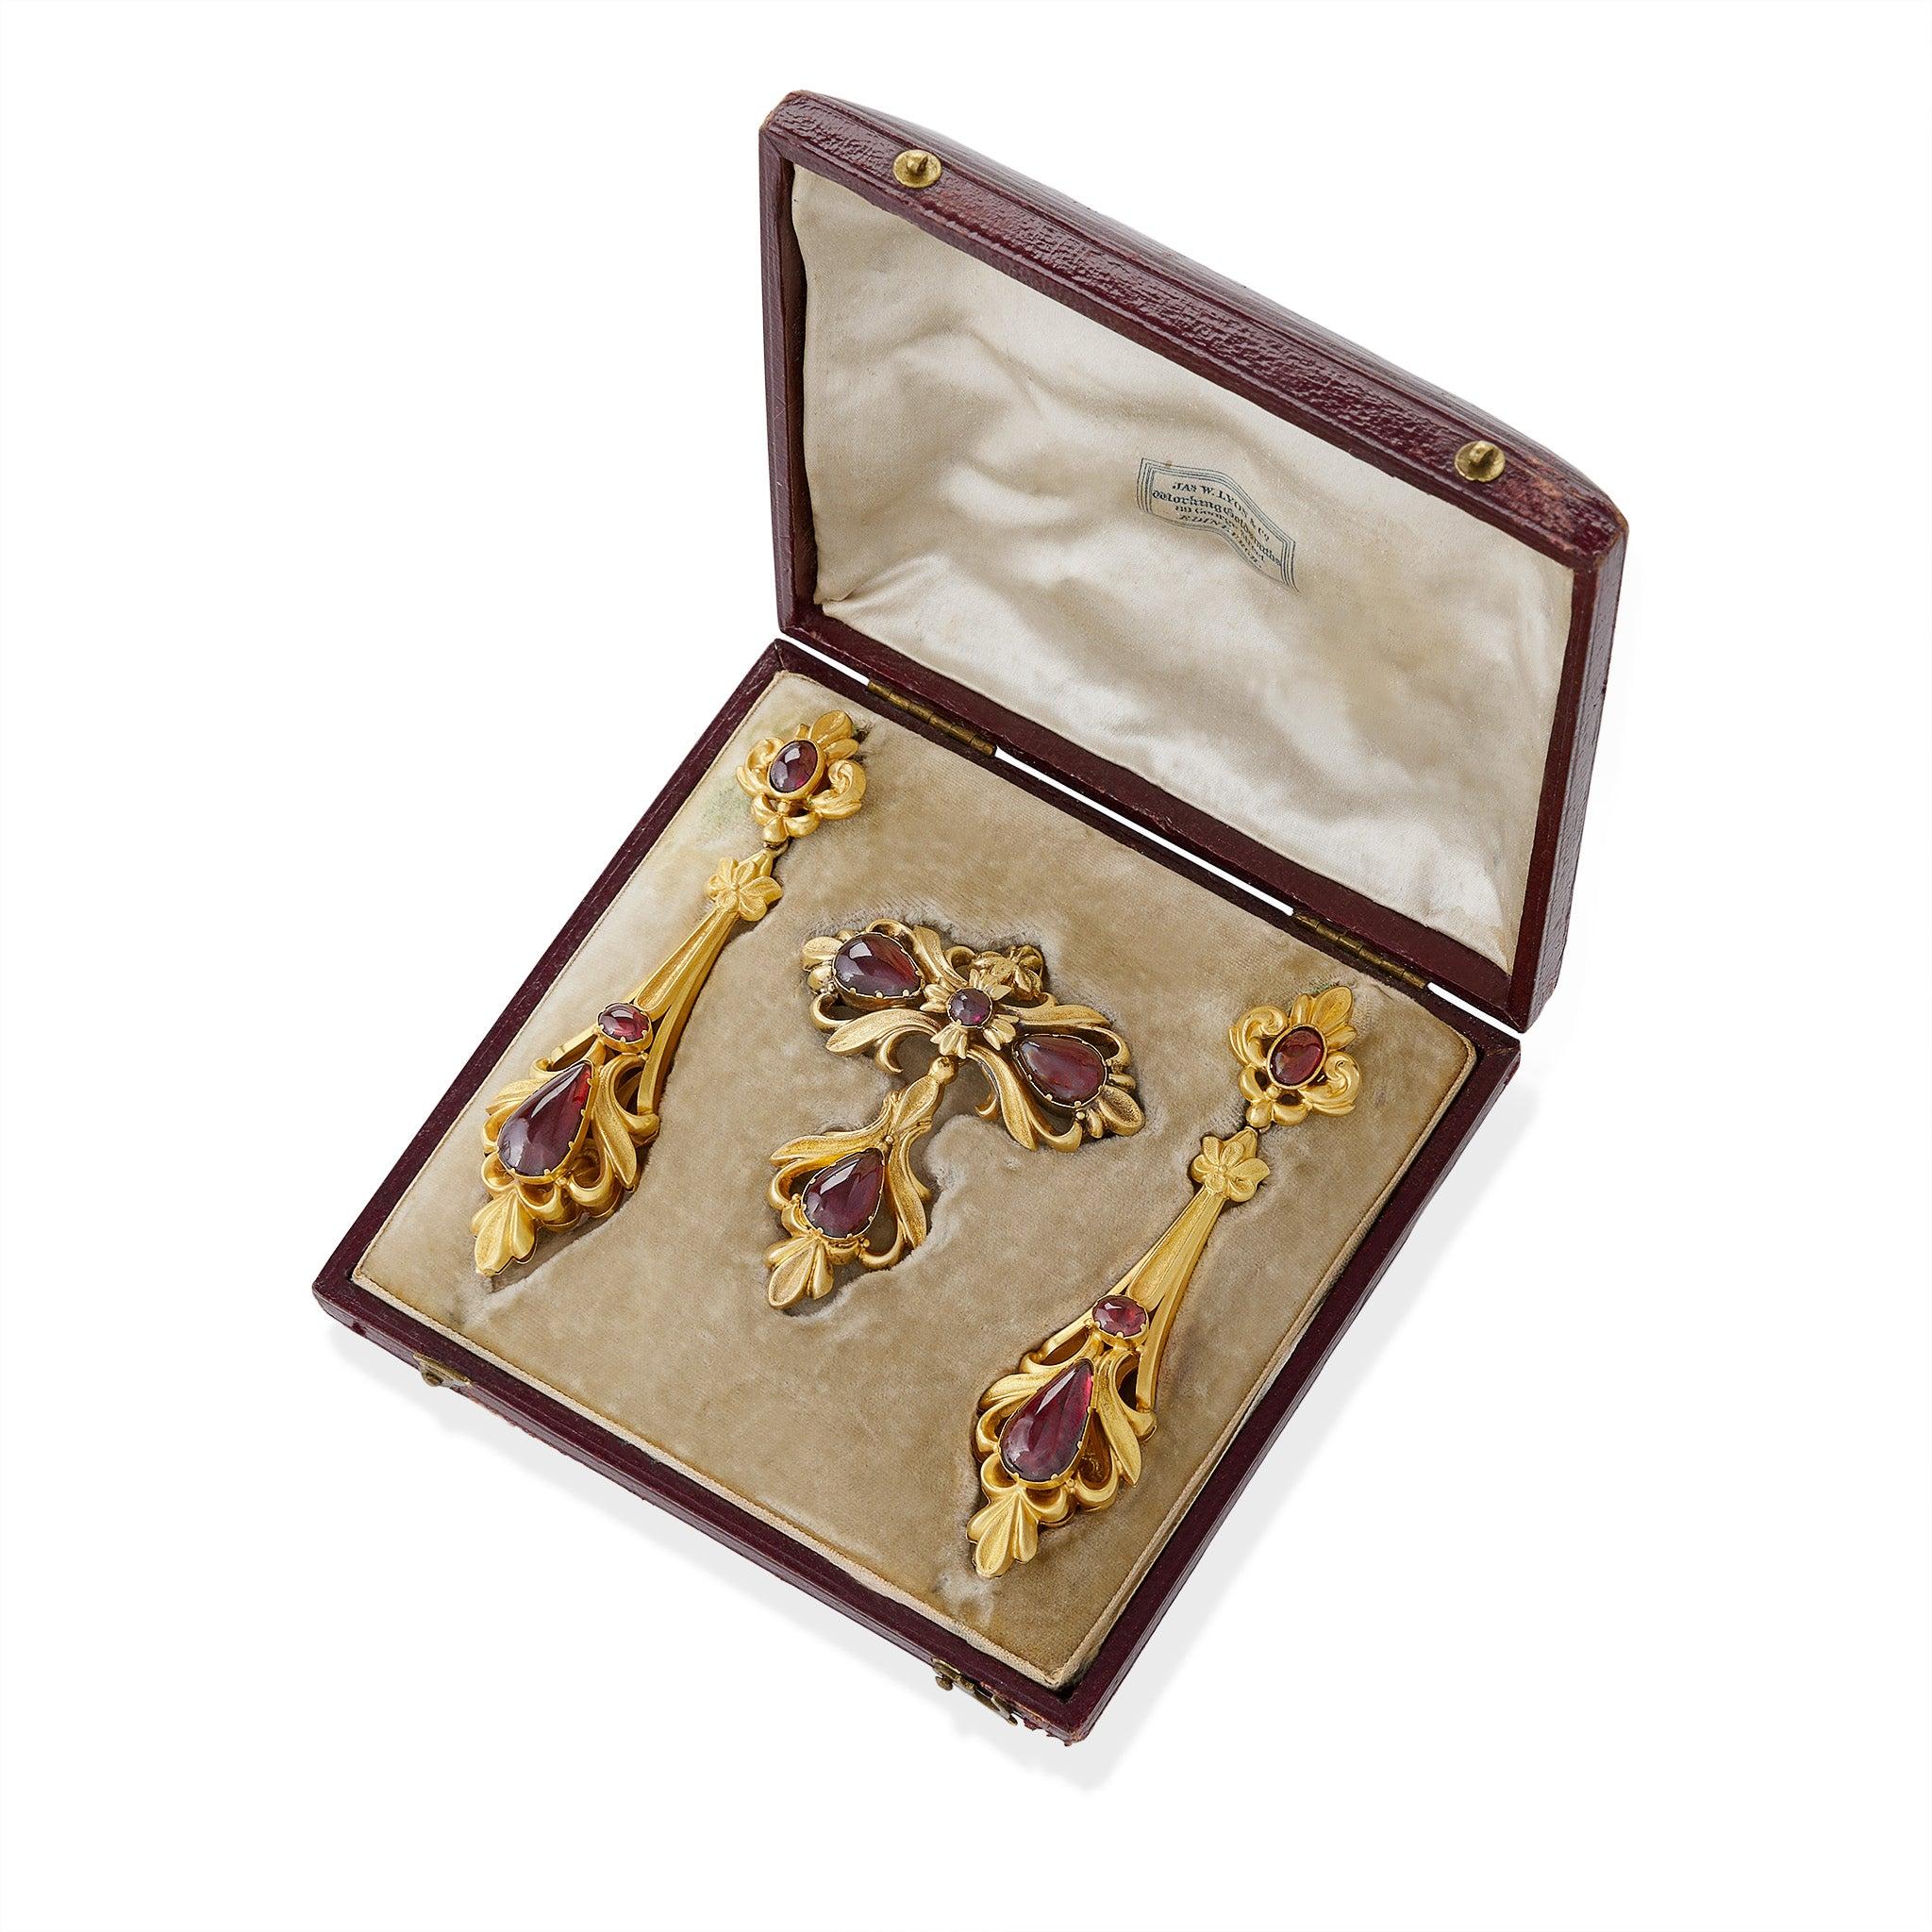 This antique Victorian 15K gold demi-parure comprising pendant earrings and pendant brooch with chain is set with over 10.00 carats of cabochon almandine garnets. The elongated pendant earrings are designed as scrolling leaf motif tops, each with an